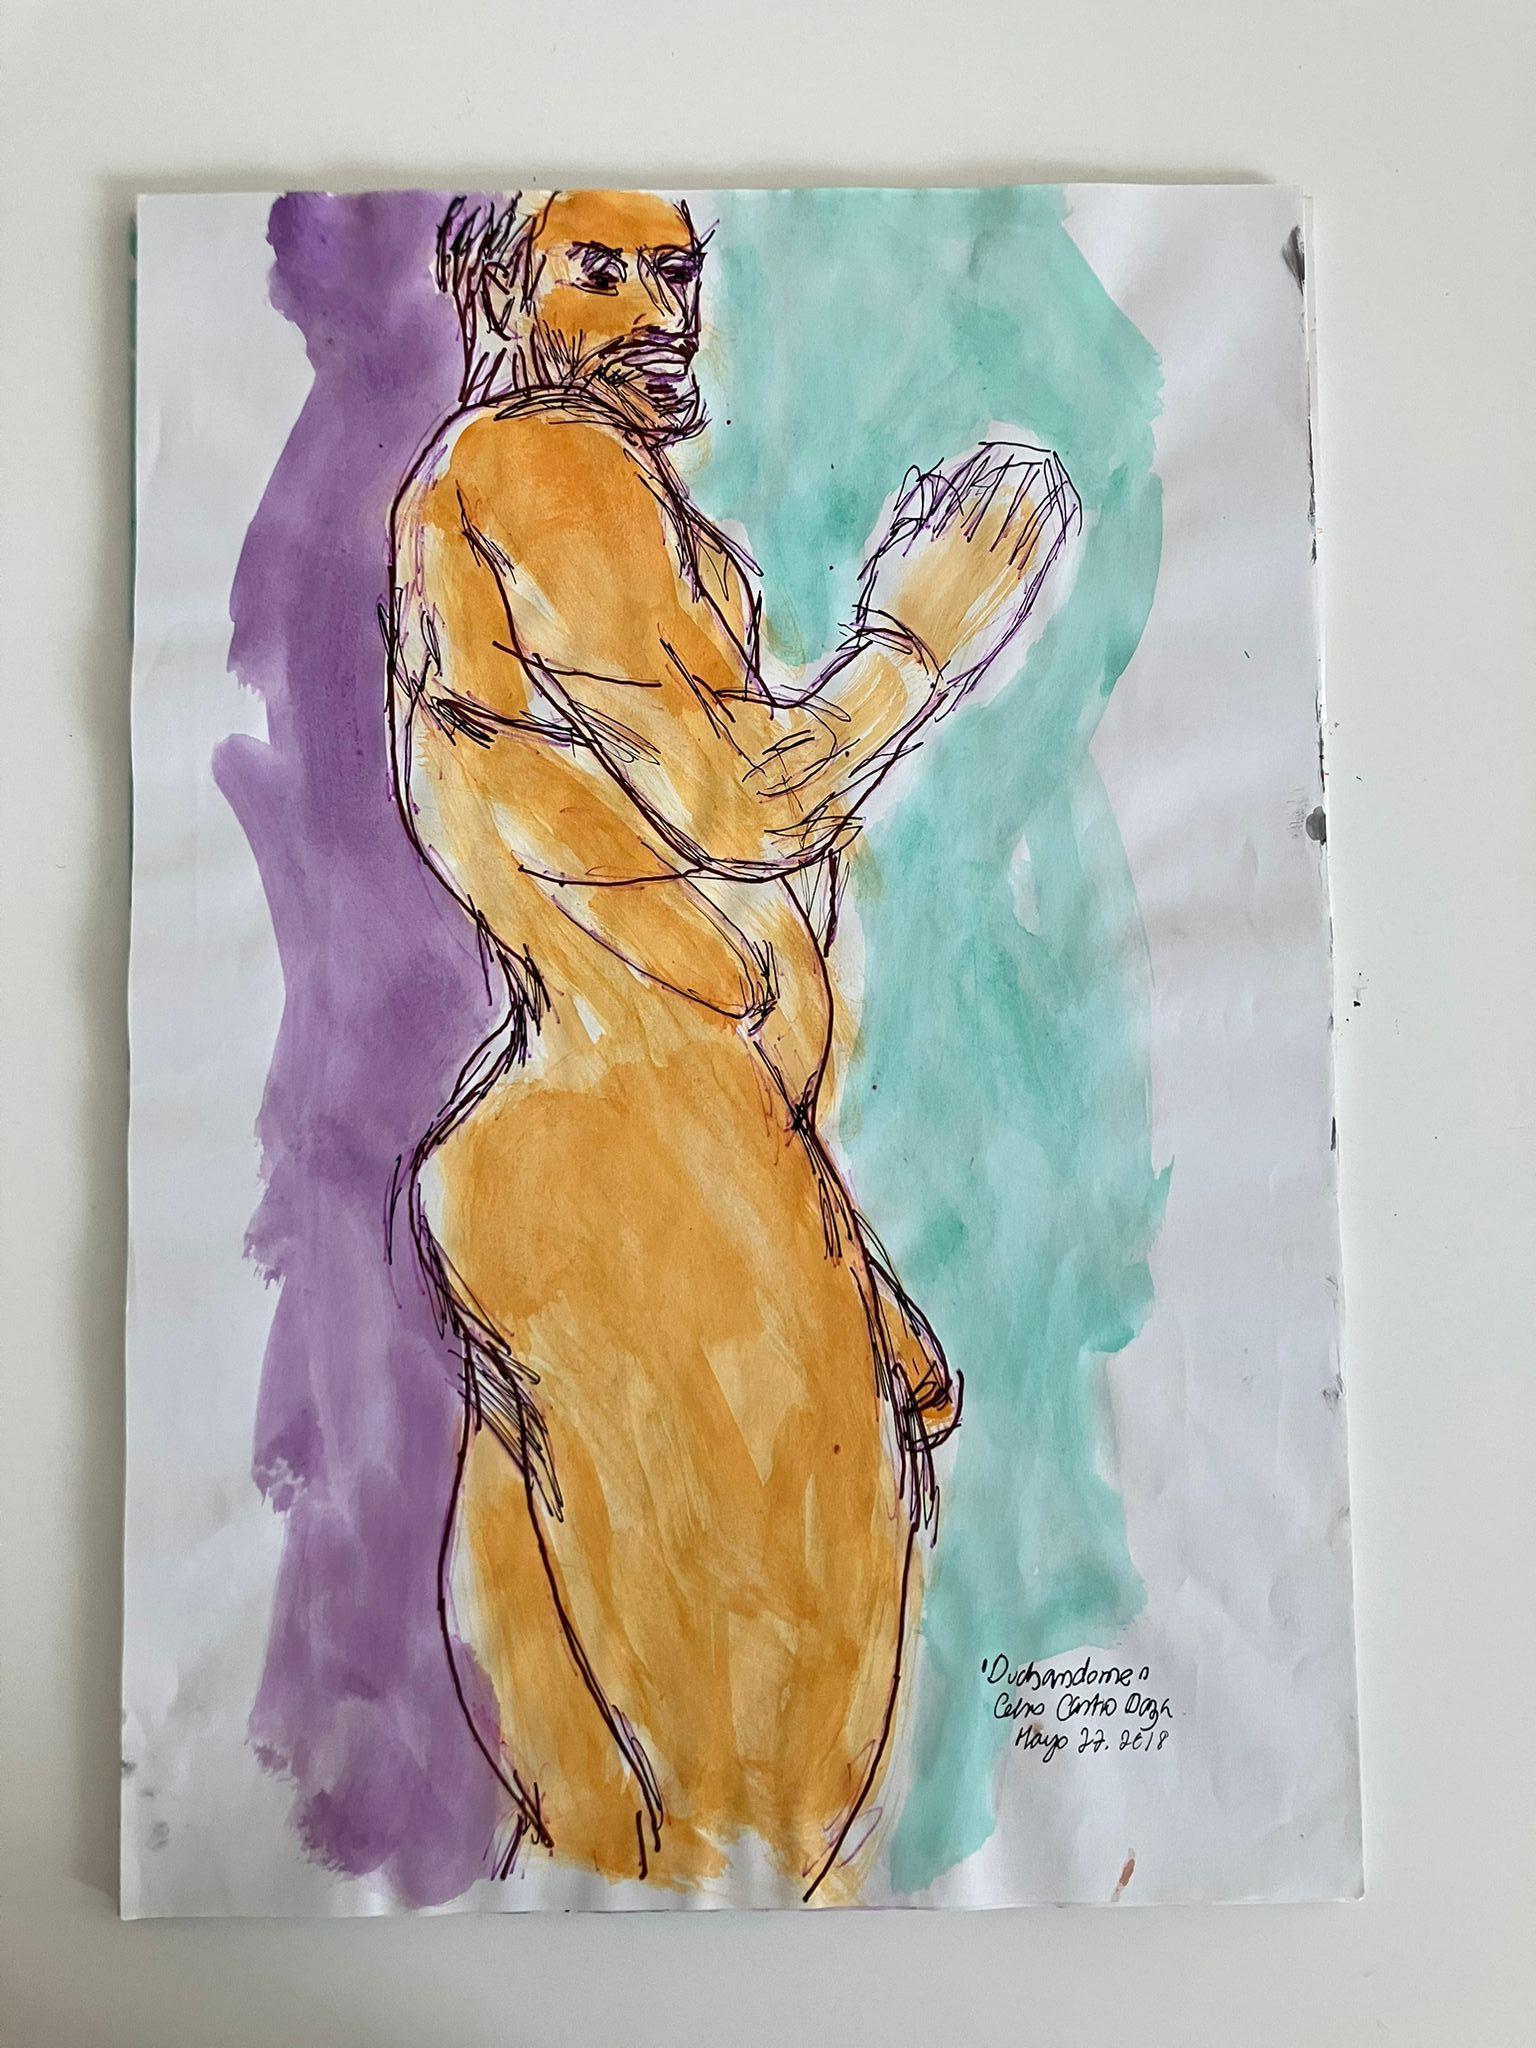 From the Duchándome Nude, Series. Set of 12 Watercolors & Ink on archival paper - Contemporary Art by Celso José Castro Daza